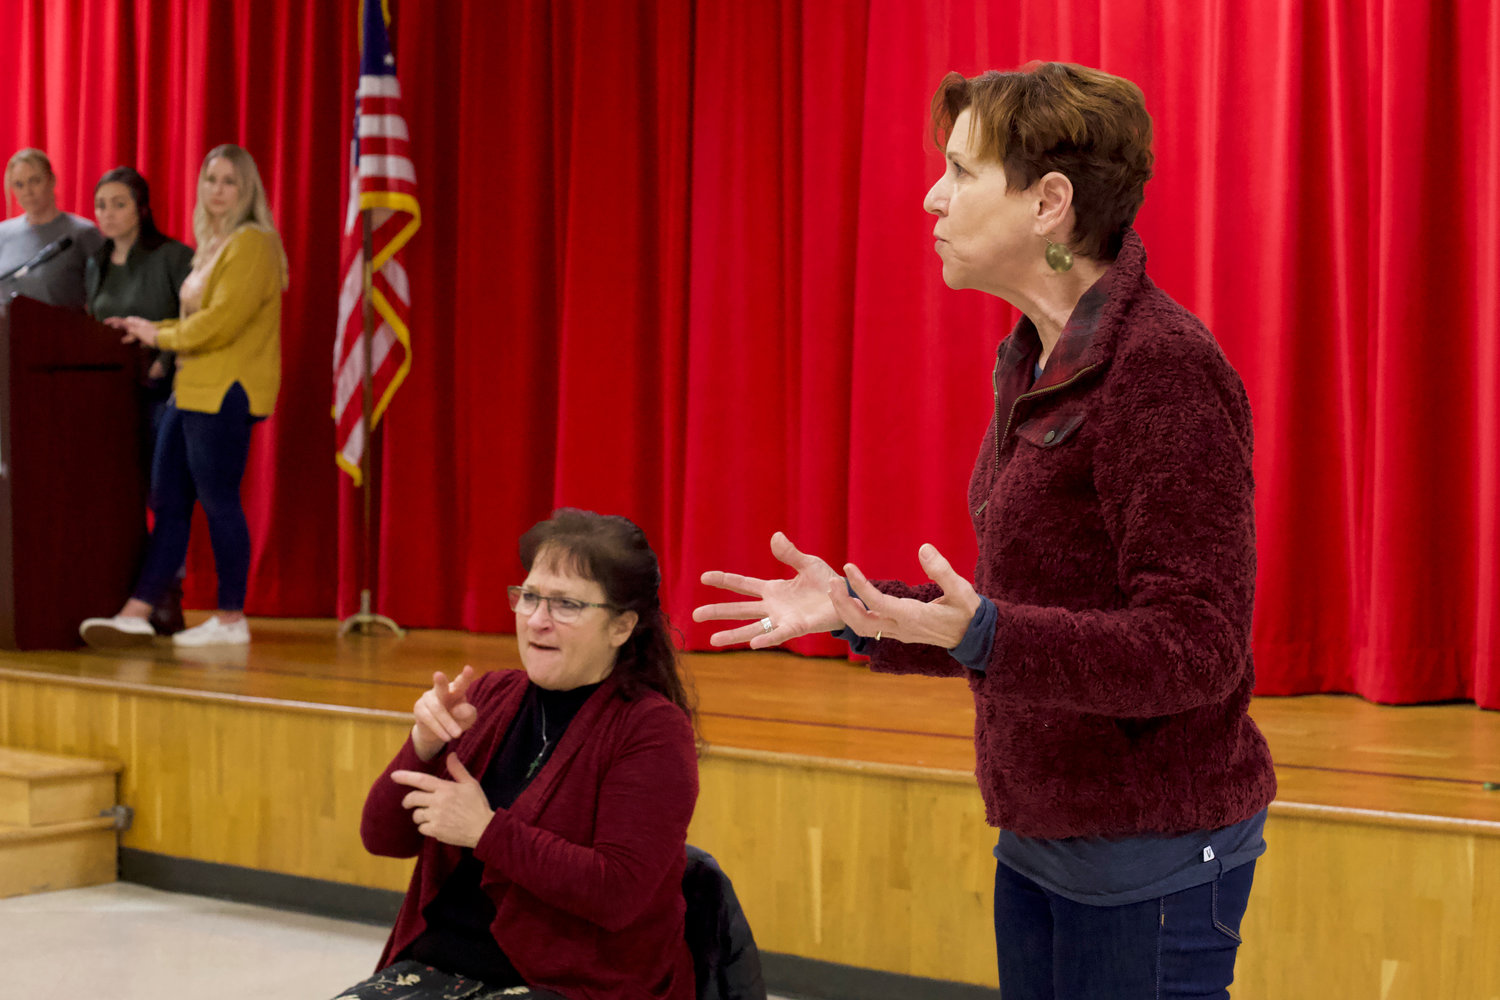 Anne Marie, a Tenino-area resident, speaks to fellow attendees of a community meeting at Tenino High School on Sunday.